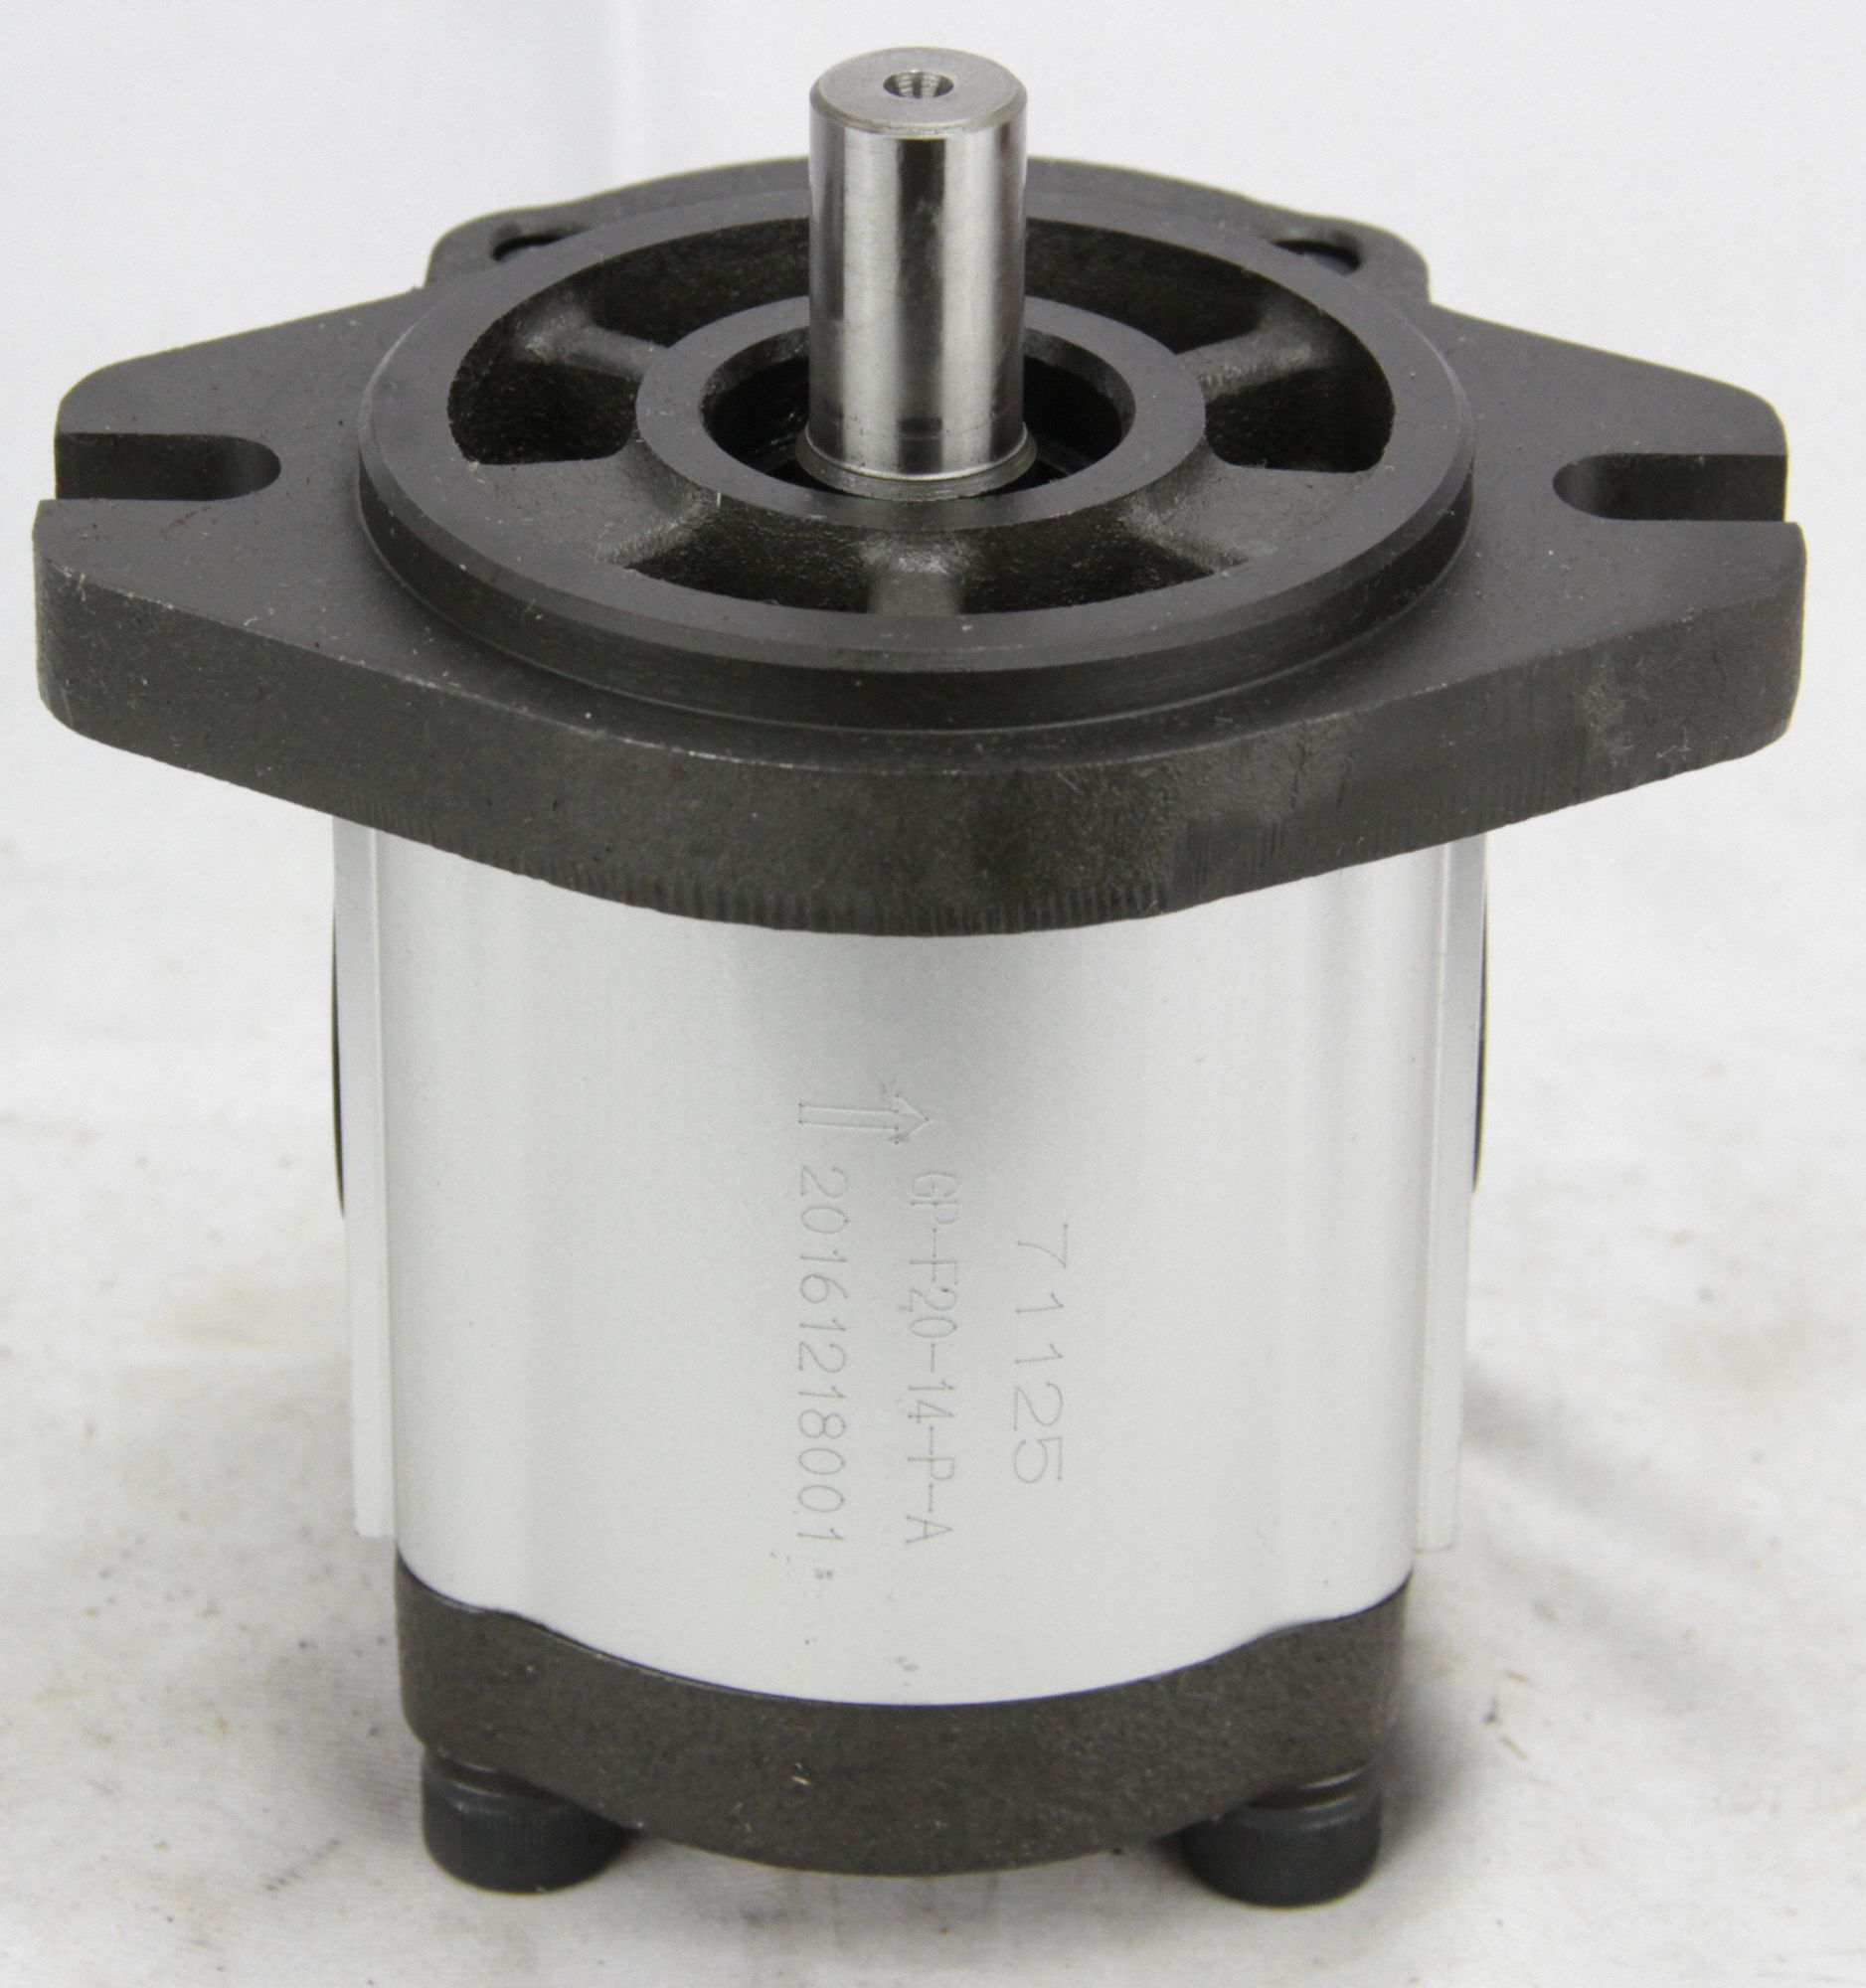 SAE 10 Side Ports 250180 4-Bolt Flange Mounting CHIEF MH Series Gear Pumps/Motors: 0.388 CID 1600 PSI 3 GPM @ 1800 RPM Rotation 